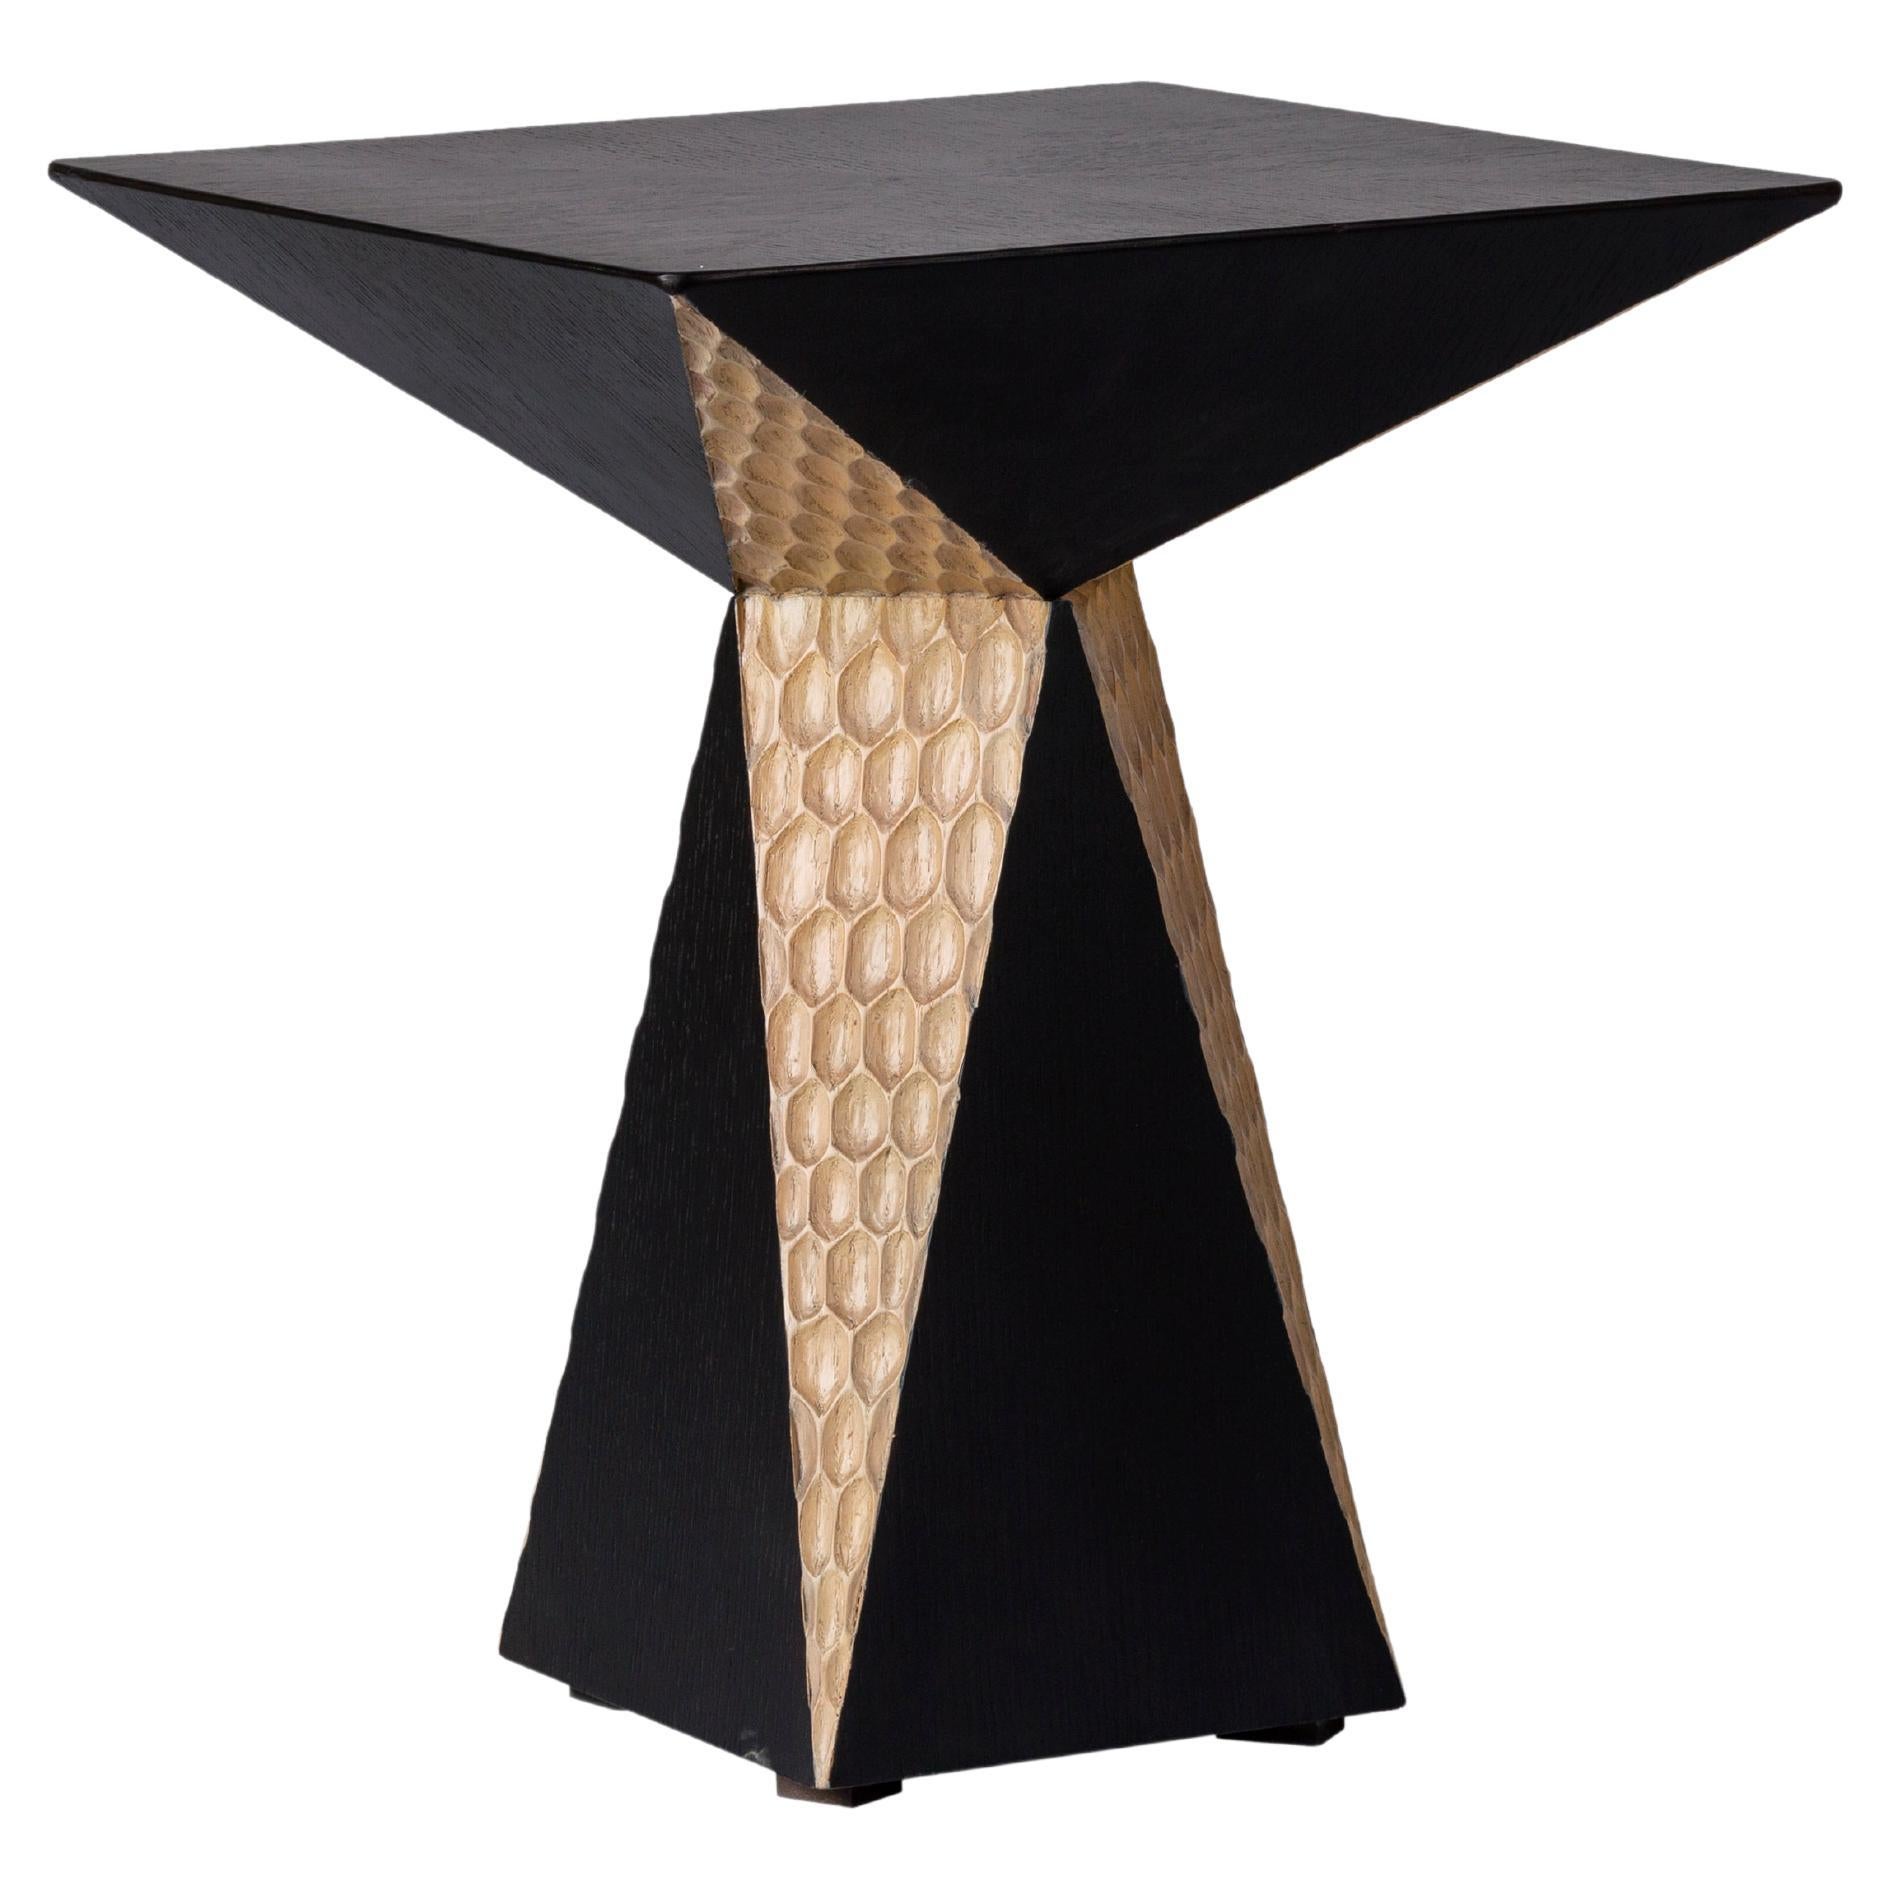 Hand Carved Oak Side Table Inspired by Crystal Formations of Oases in Egypt, L